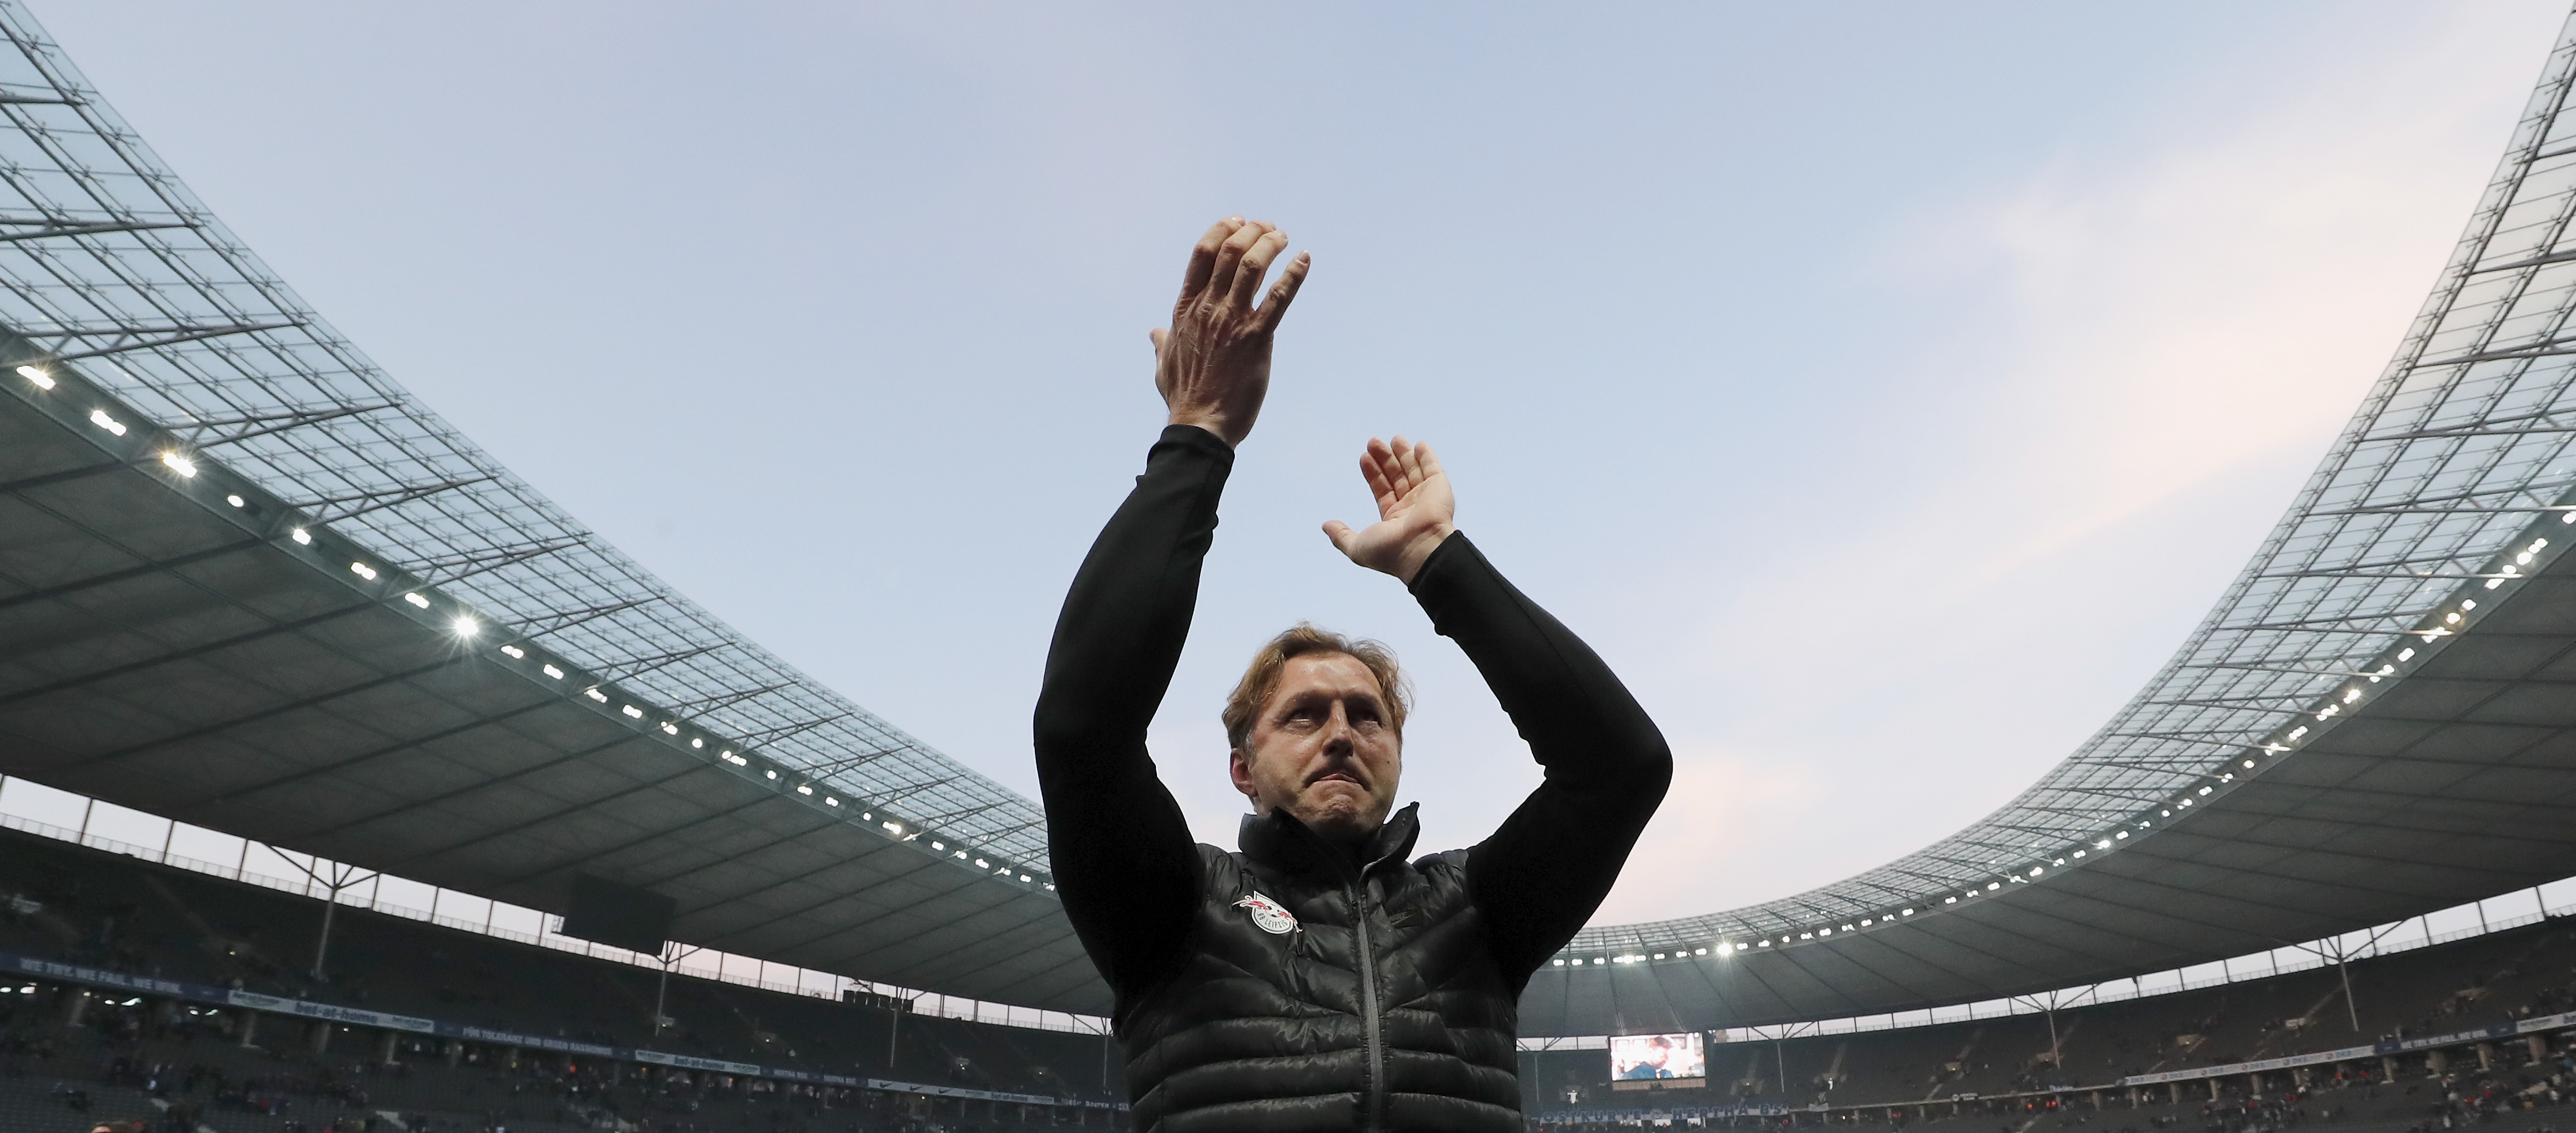 BERLIN, GERMANY - MAY 06:  Head coach Ralph Hasenhuettl celebrates the participation of the UEFA Champions League in the next season after winning the Bundesliga match between Hertha BSC and RB Leipzig at Olympiastadion on May 6, 2017 in Berlin, Germany.  (Photo by Boris Streubel/Bongarts/Getty Images)